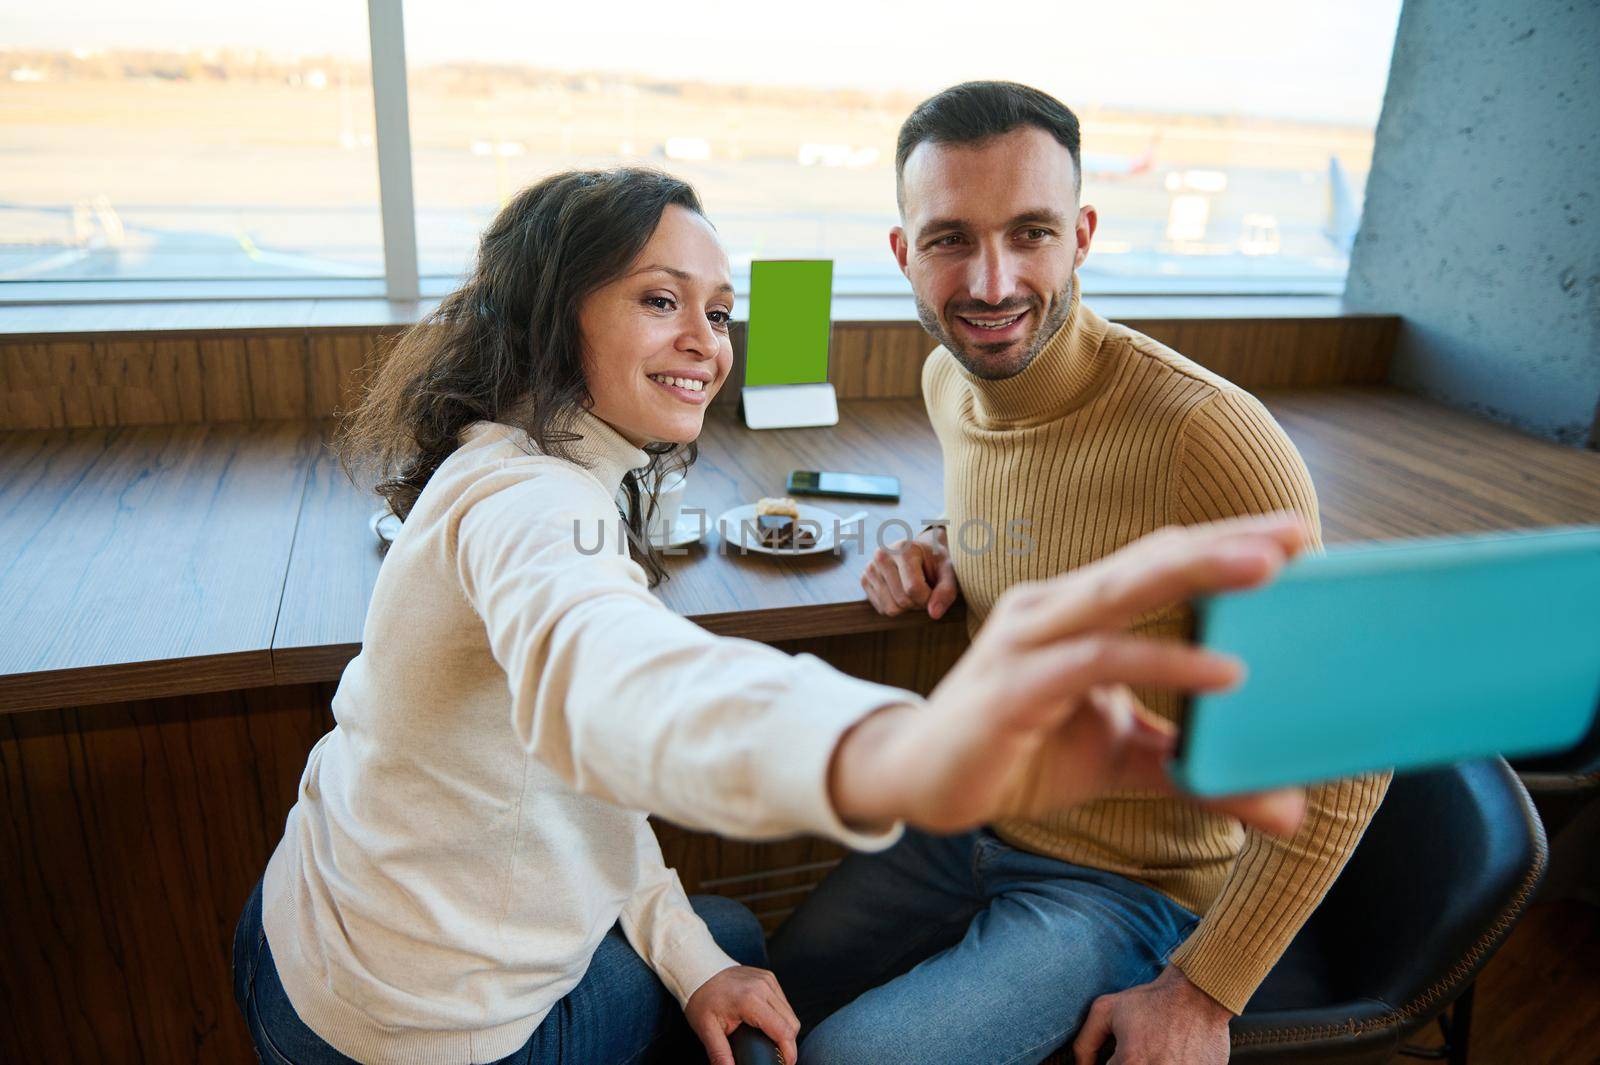 Beautiful multi ethnic loving couple enjoying coffee break together, sitting at a table in an airport restaurant, taking a selfie against the backdrop of runways with planes, waiting to board a flight